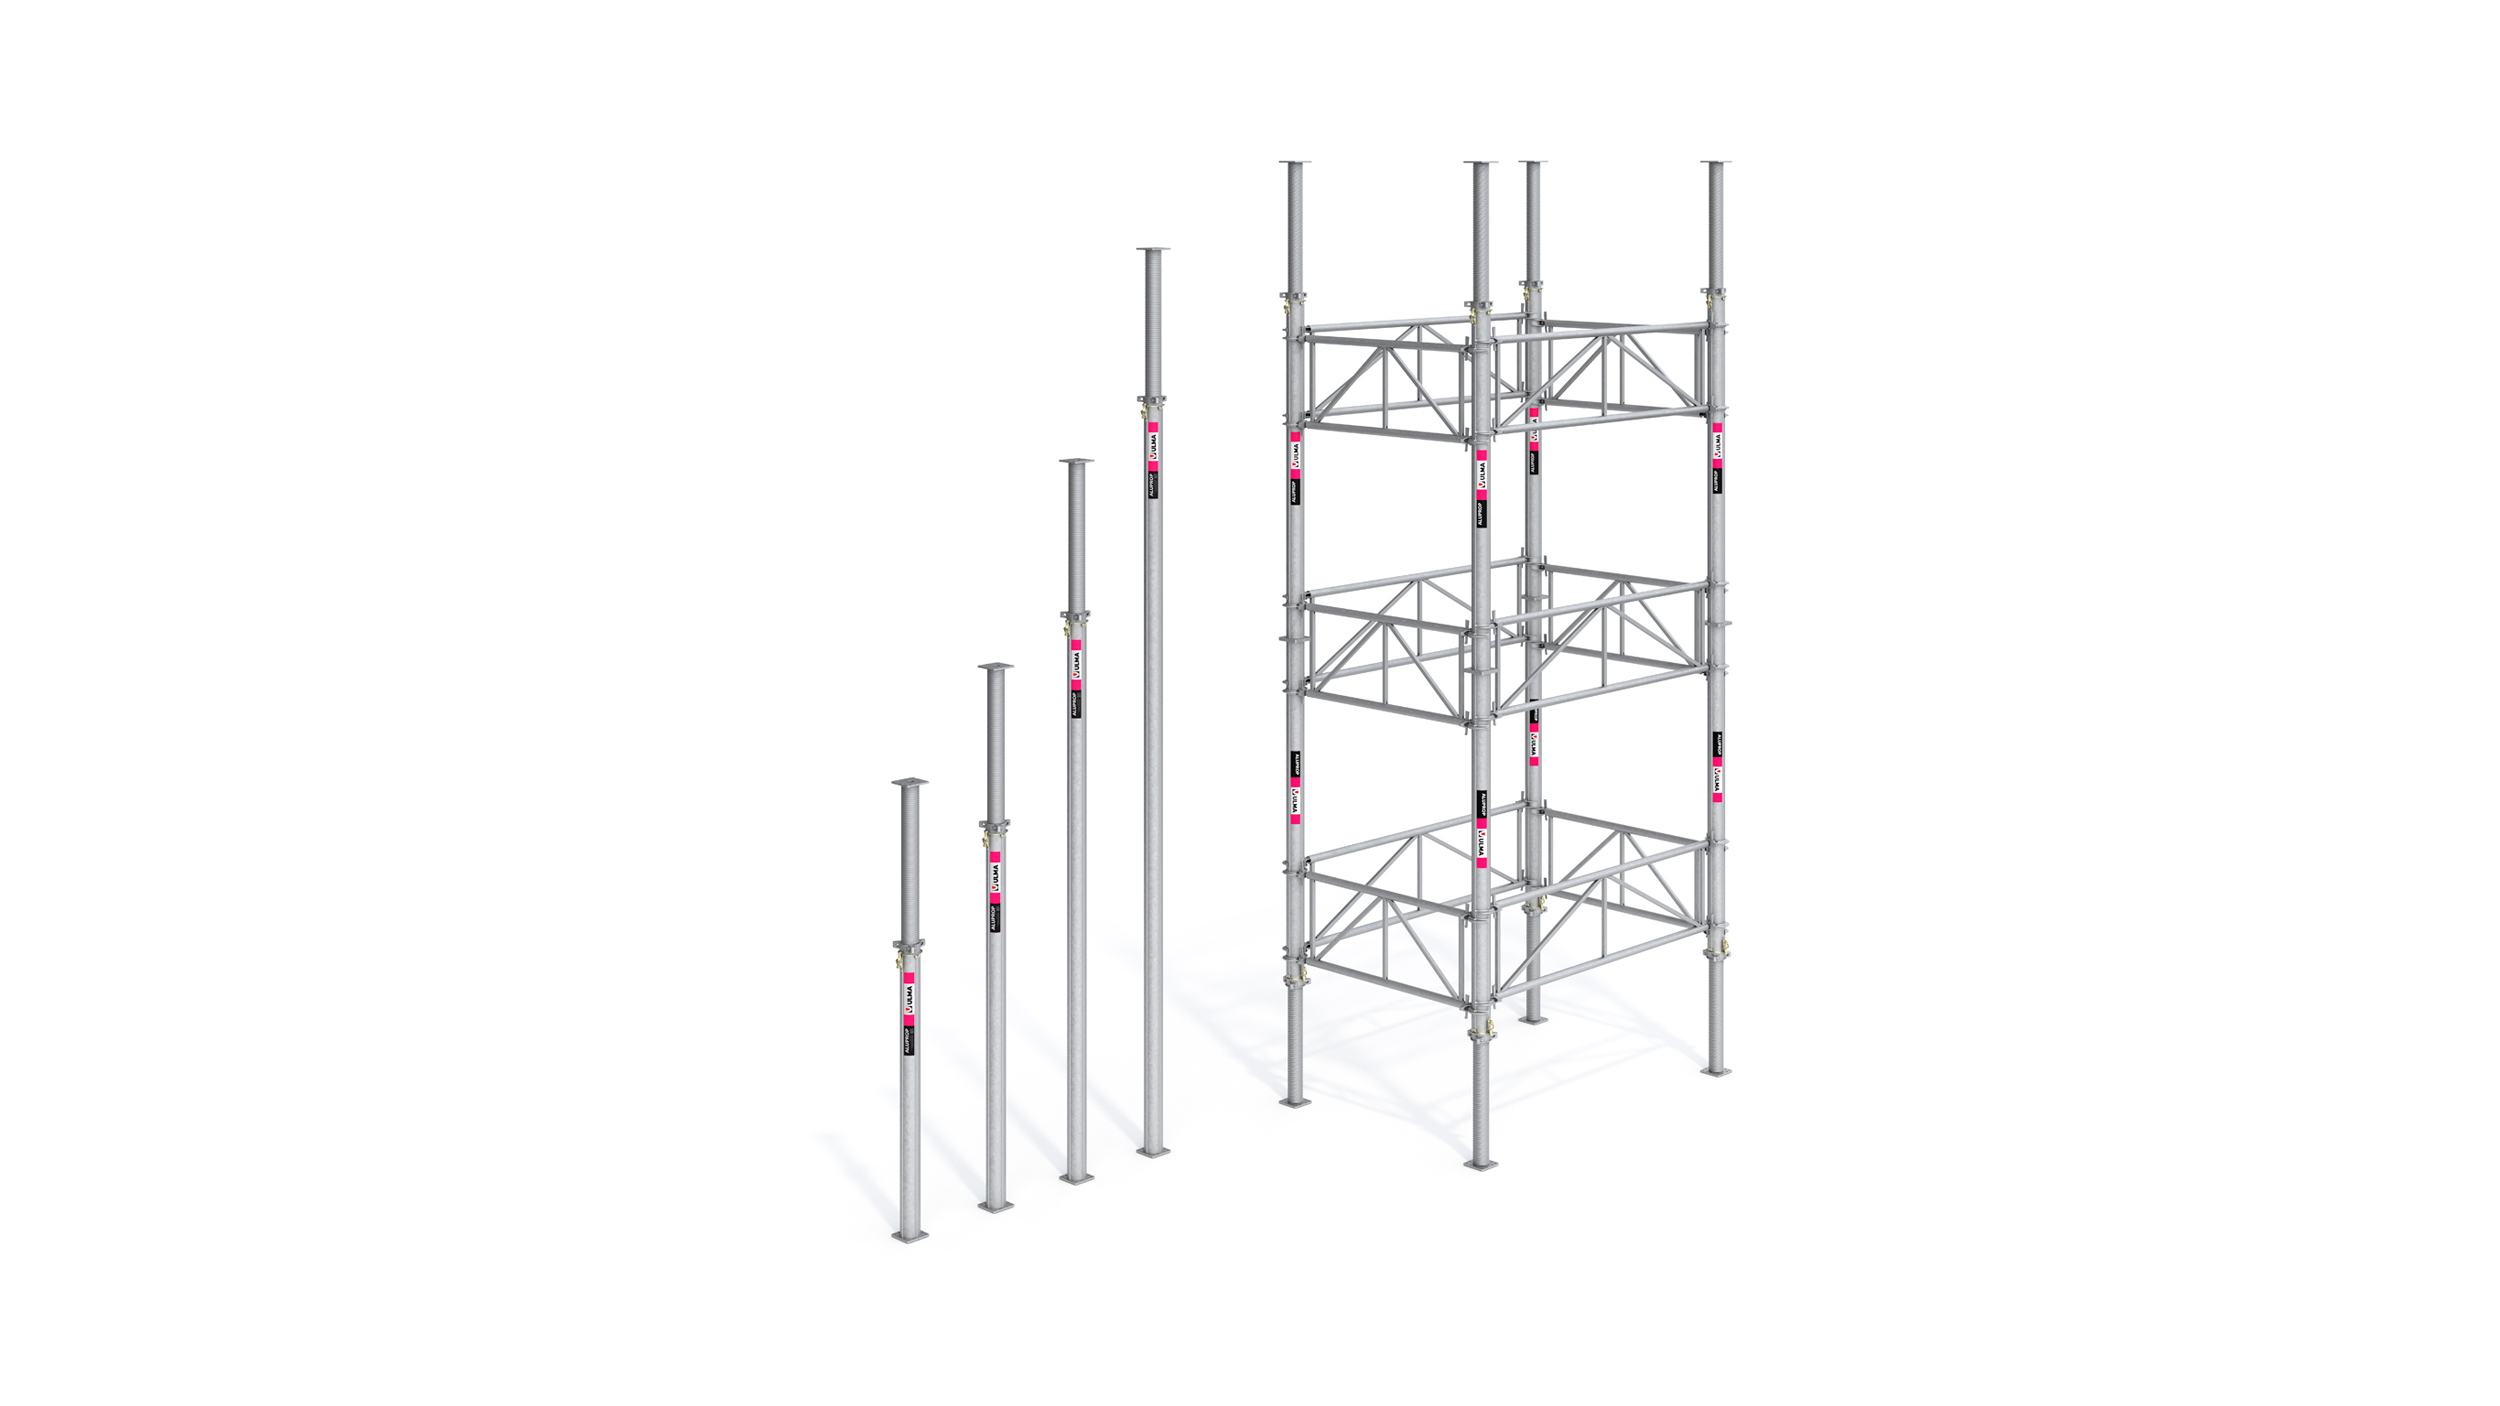 High load-bearing capacity shoring posts to shore horizontal formwork and to meet shoring requirements, including re-shoring.